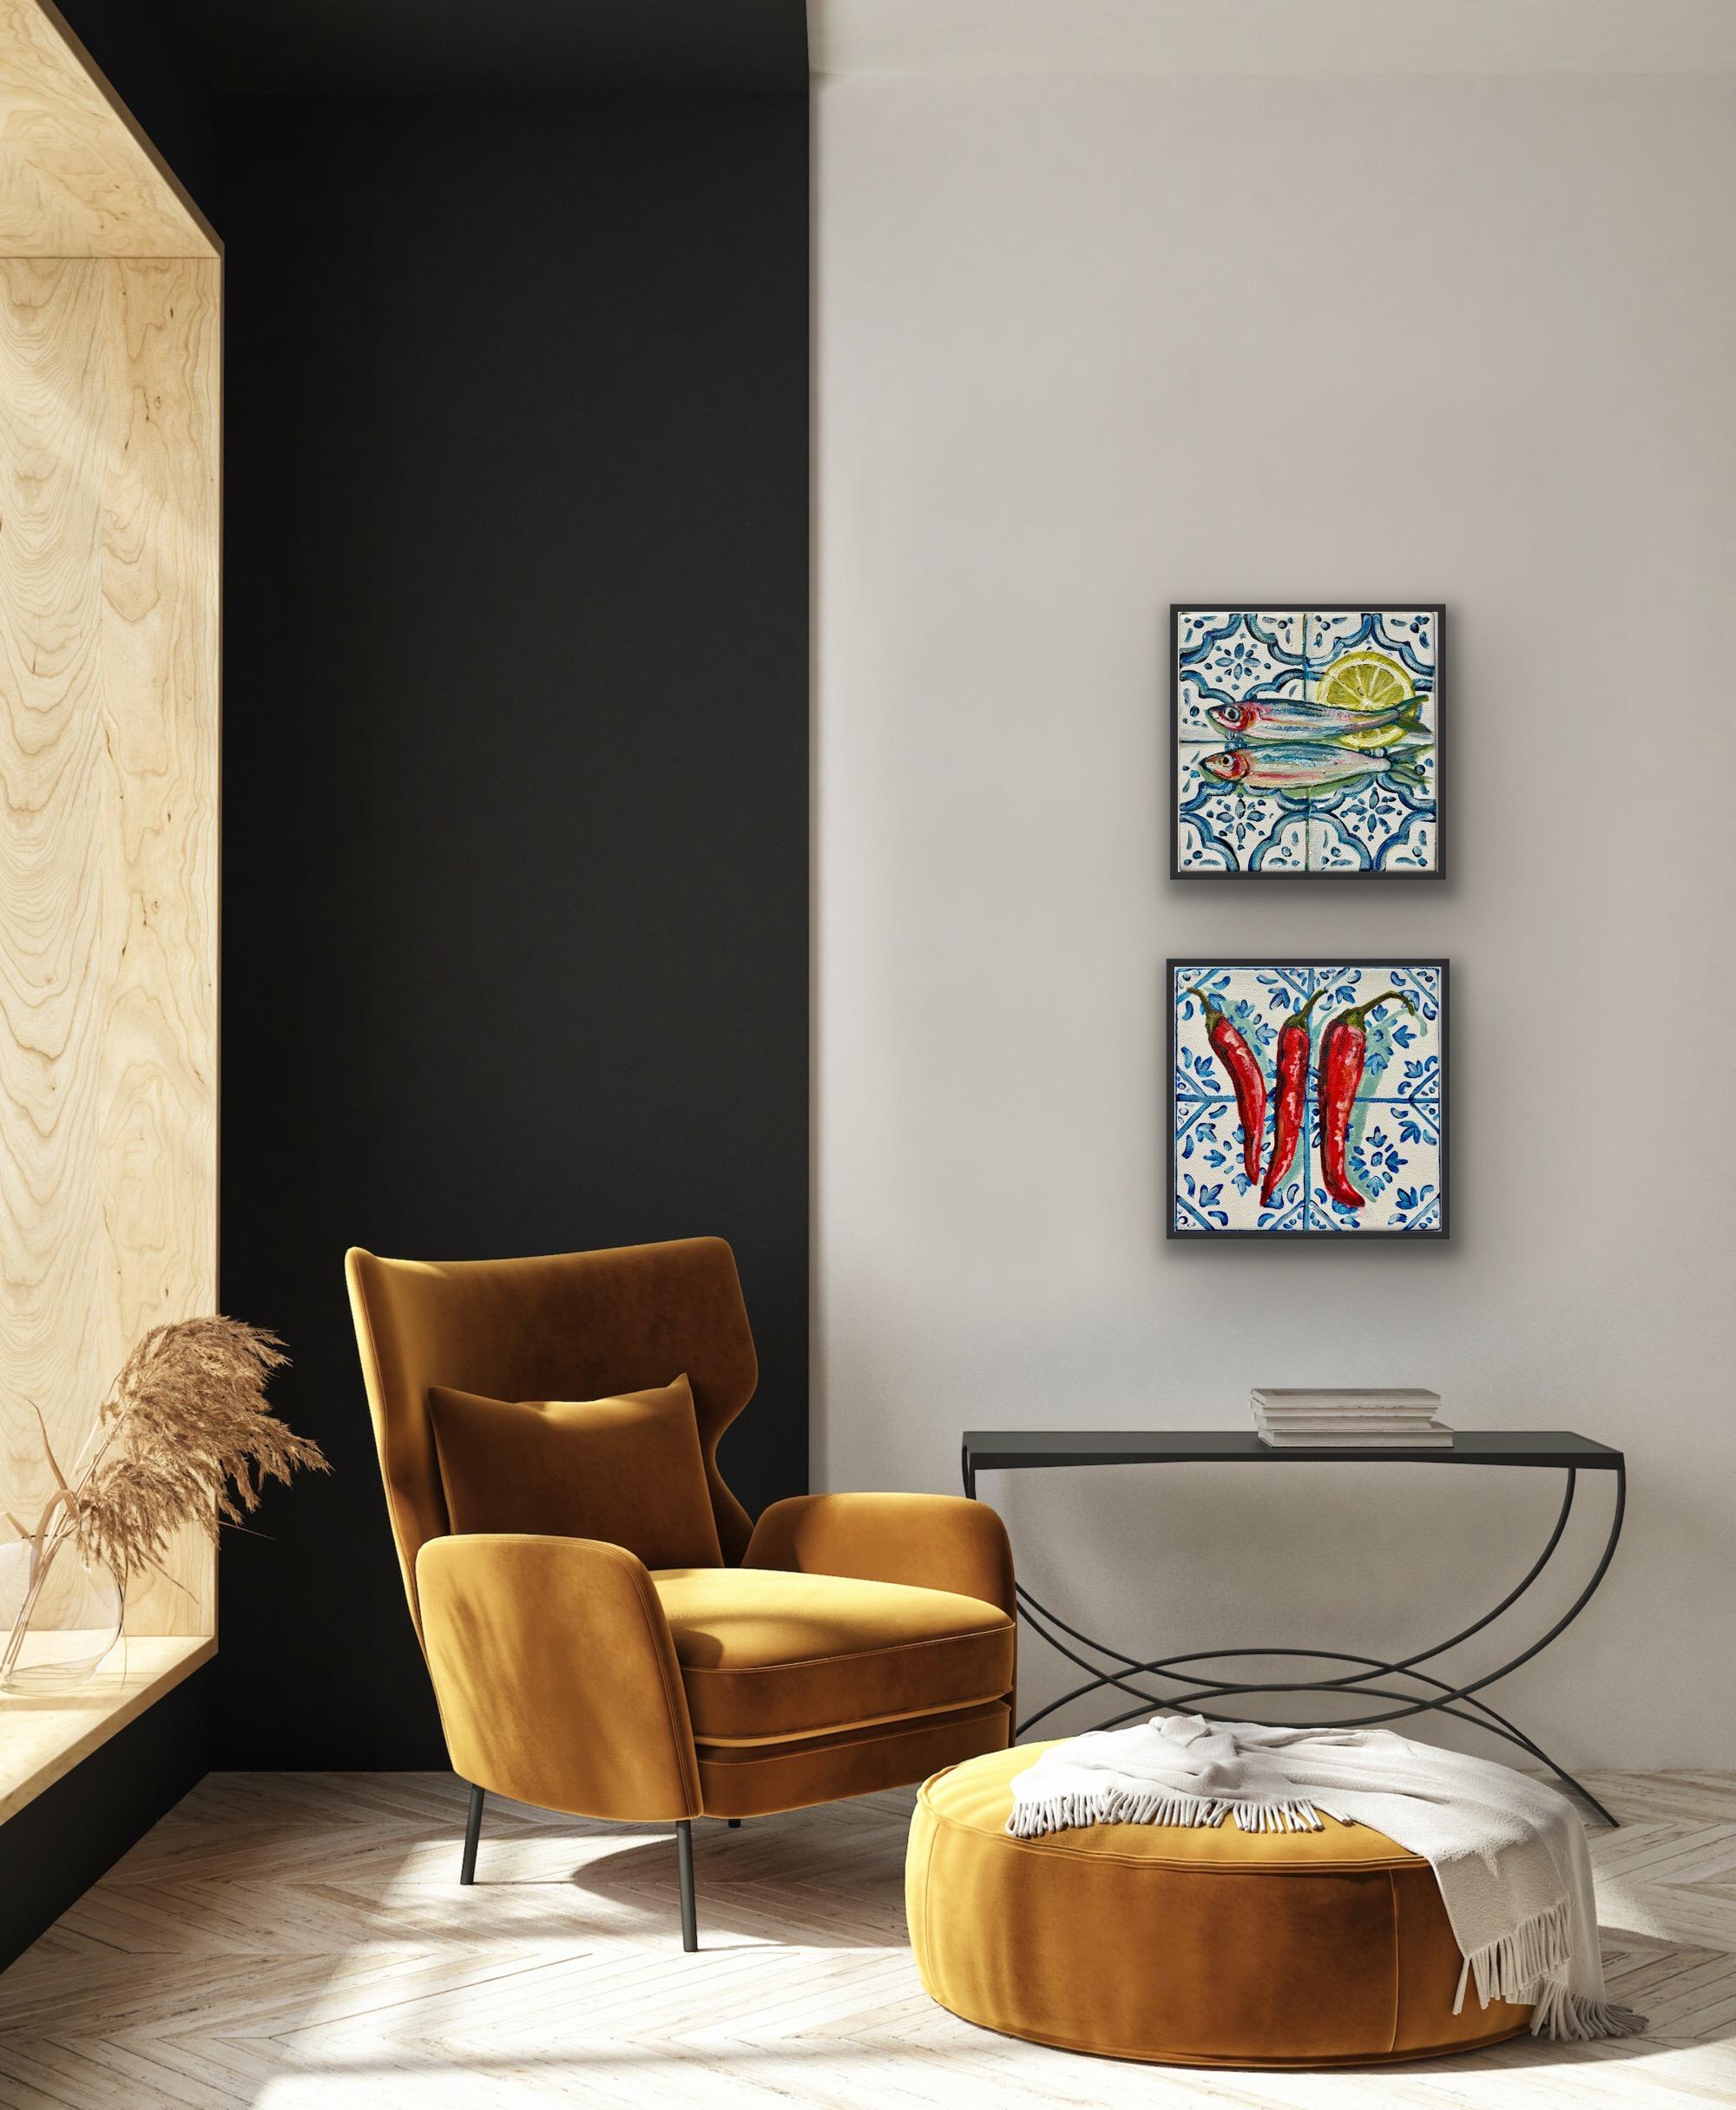 diptych of Three Chillis on Tiles and Sardines with Lemon, Original painting - Painting by Pippa Smith